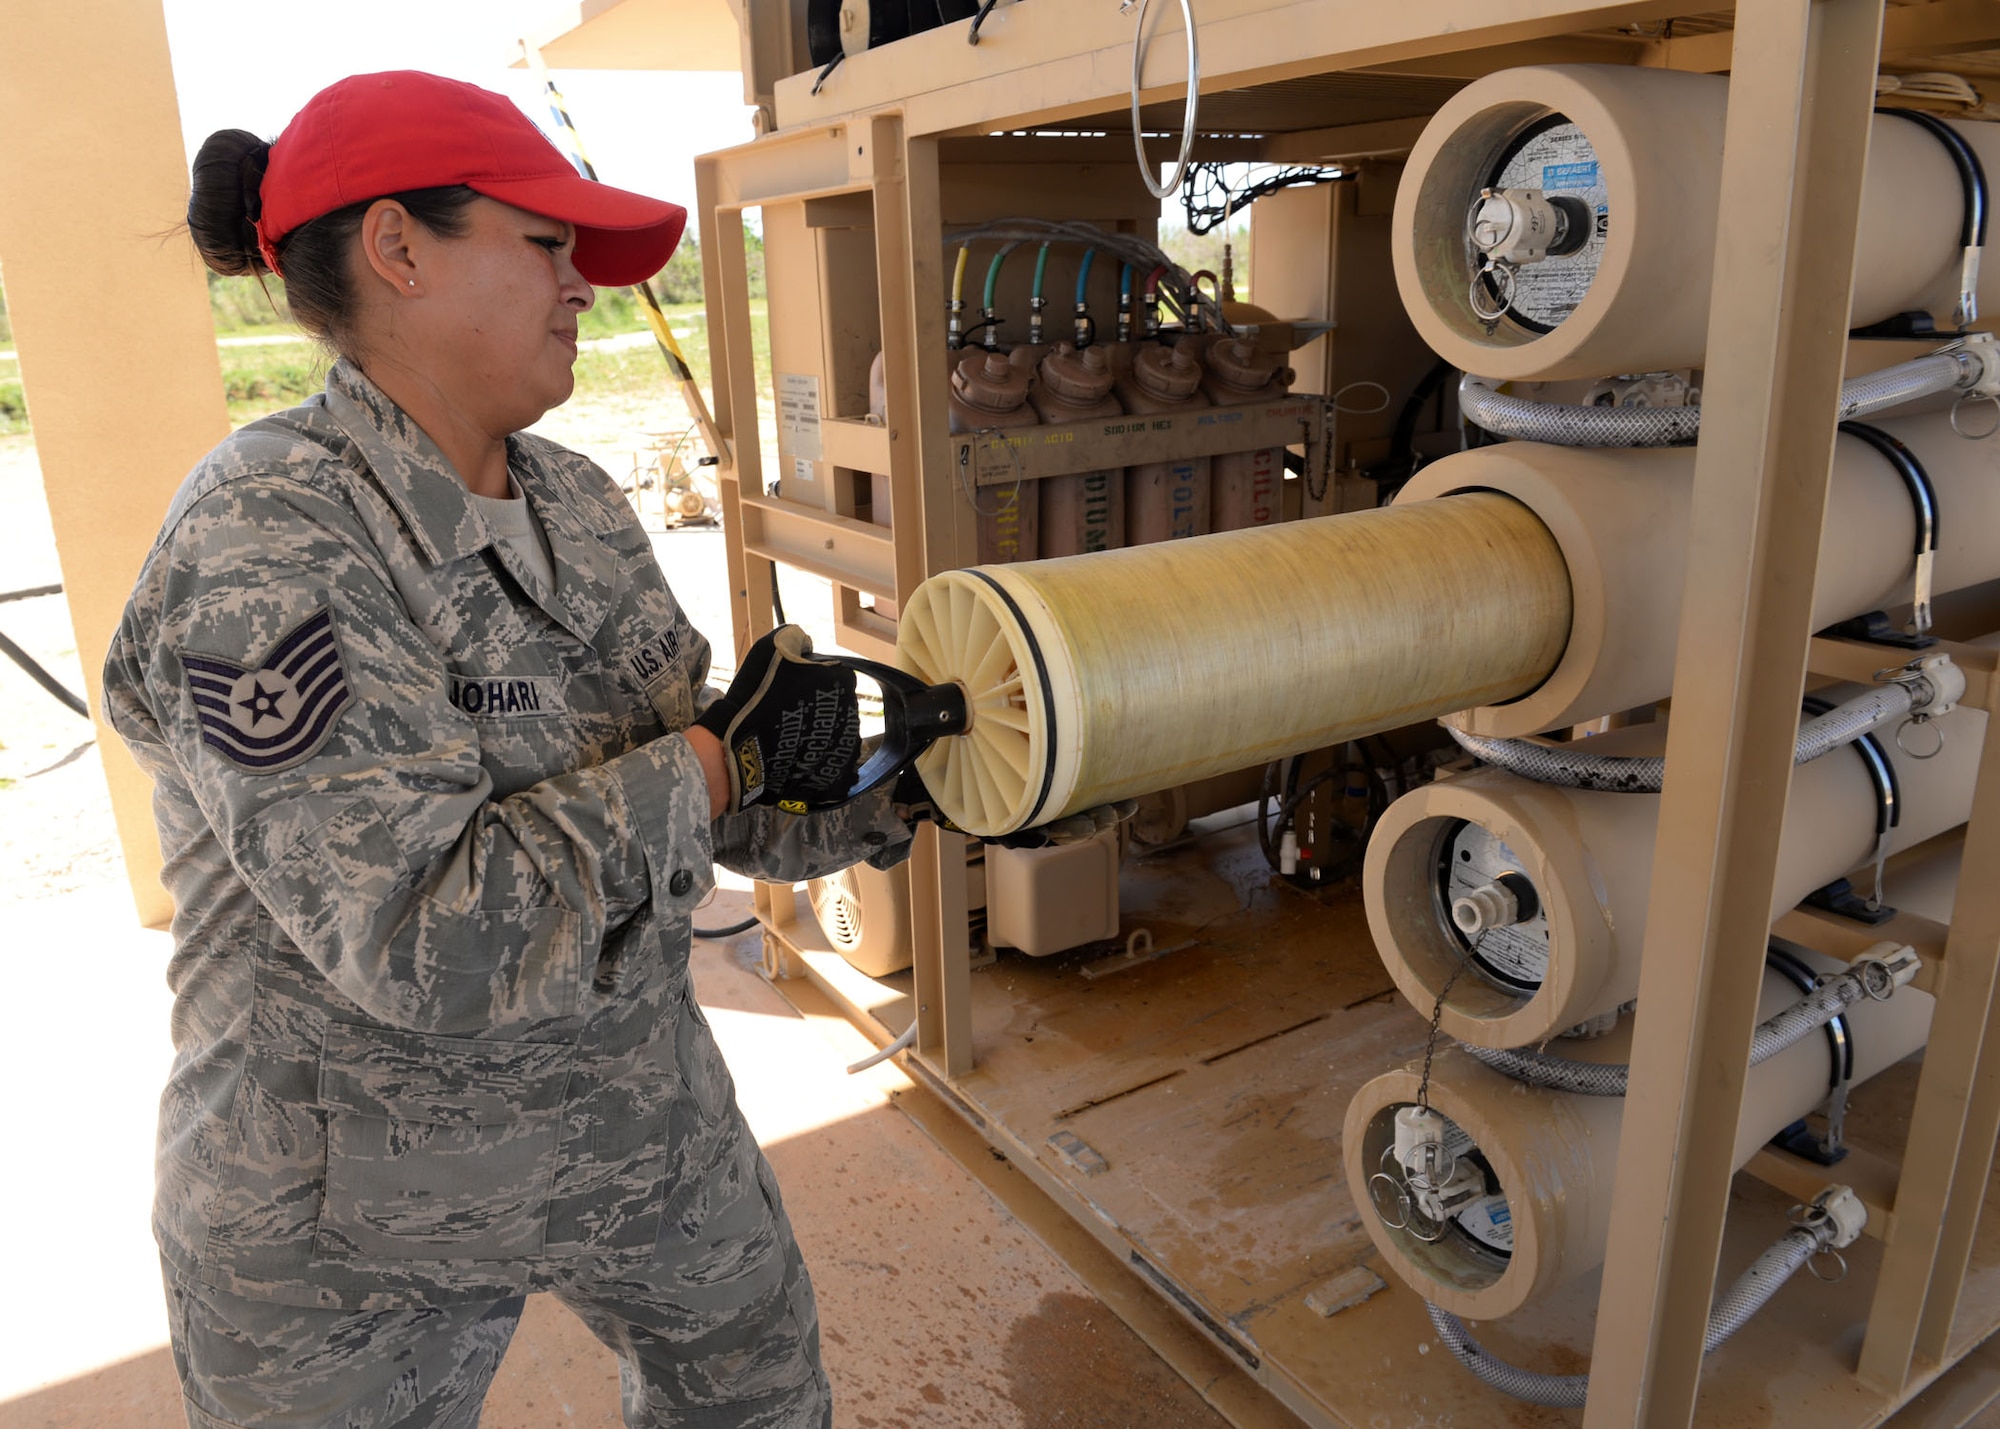 Tech. Sgt. Roshia Johari, the 554th RED HORSE NCO in charge of water fuels systems maintenance contingency training, uses an element extraction tool to pull elements from their vessels on a Reverse Osmosis Water Purification Unit June 9, 2015, at Andersen Air Force Base, Guam. Airmen are trained at Anderson AFB to be able to turn untested water into potable H2O using the ROWPU. (U.S. Air Force photo/Airman 1st Class Joshua Smoot)